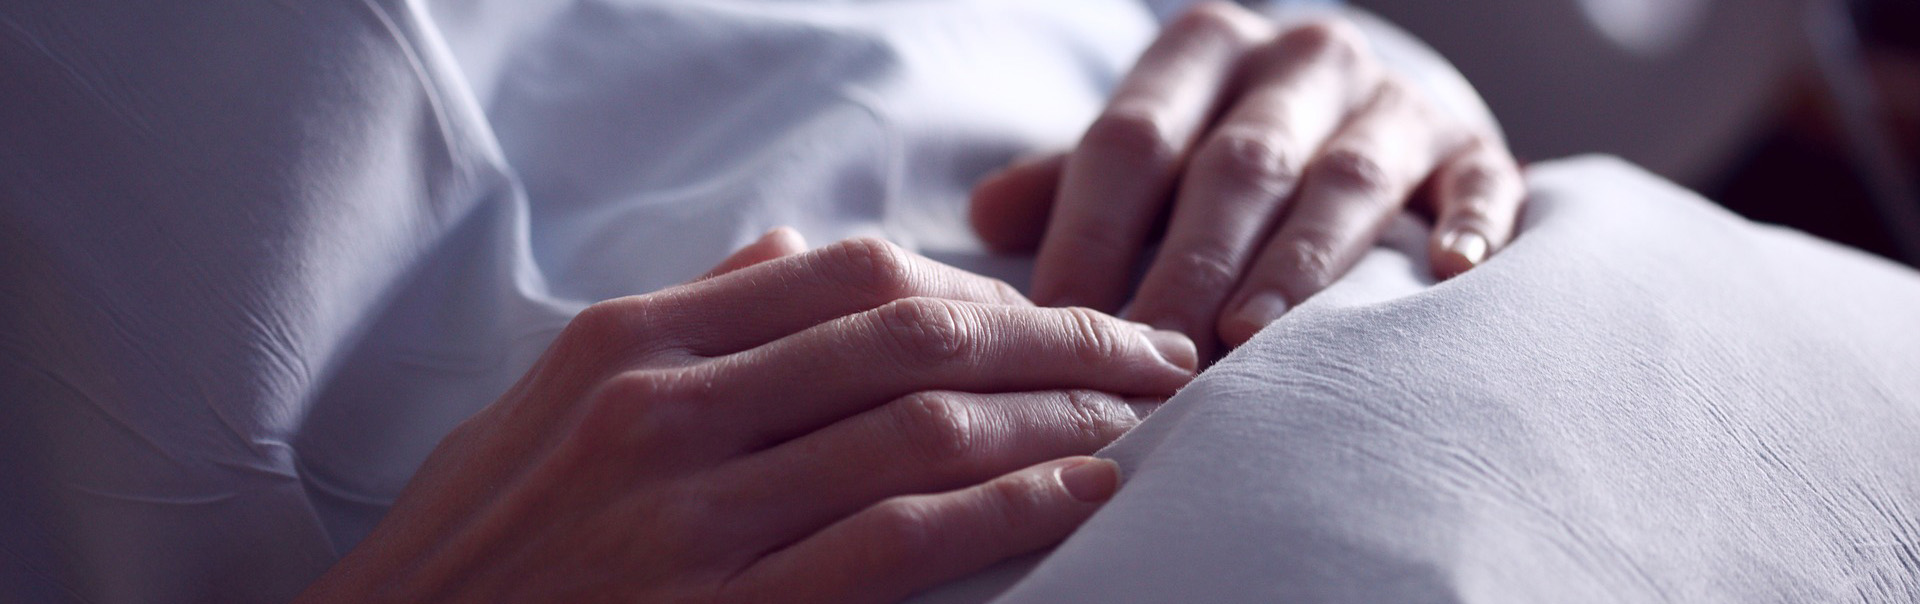 A person's hands are folded on their abdomen as they recline under a sheet.